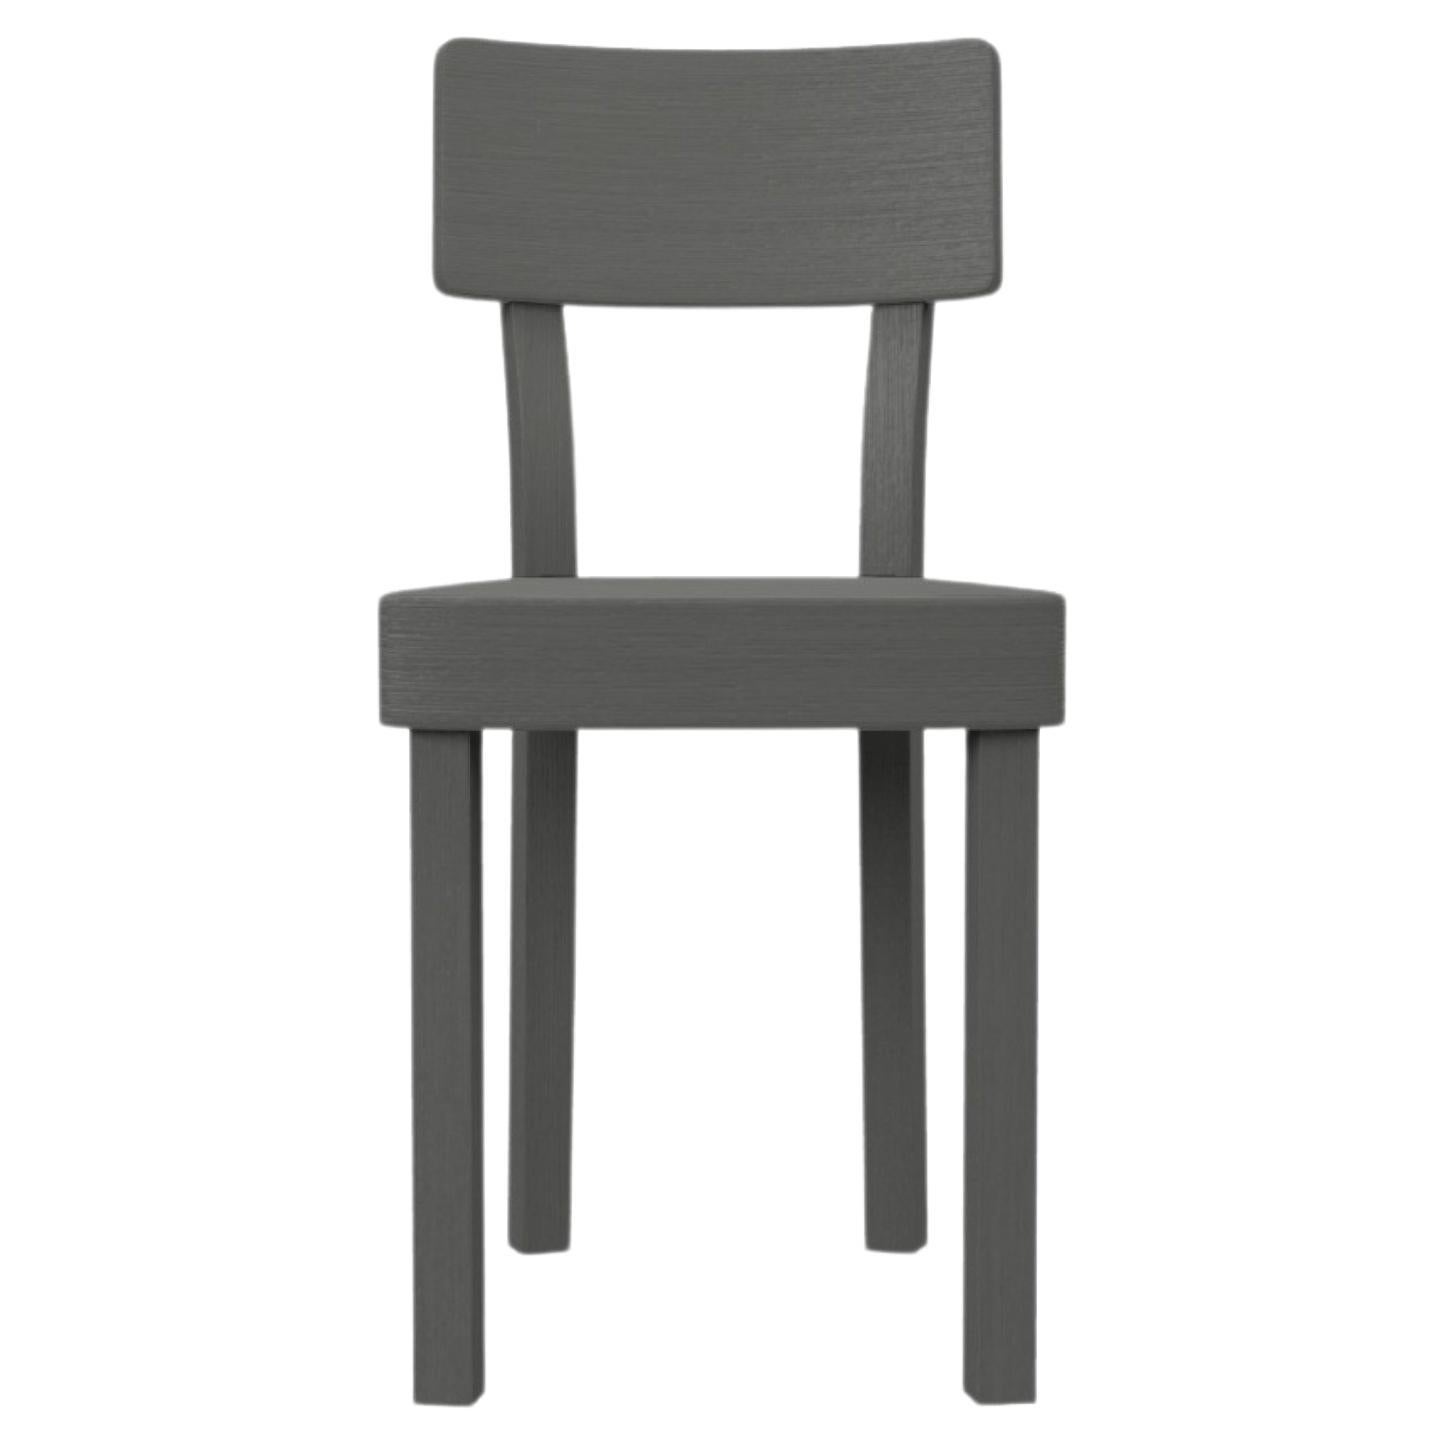 Gervasoni Black Chair in Beech Grey Lacquered by Paola Navone